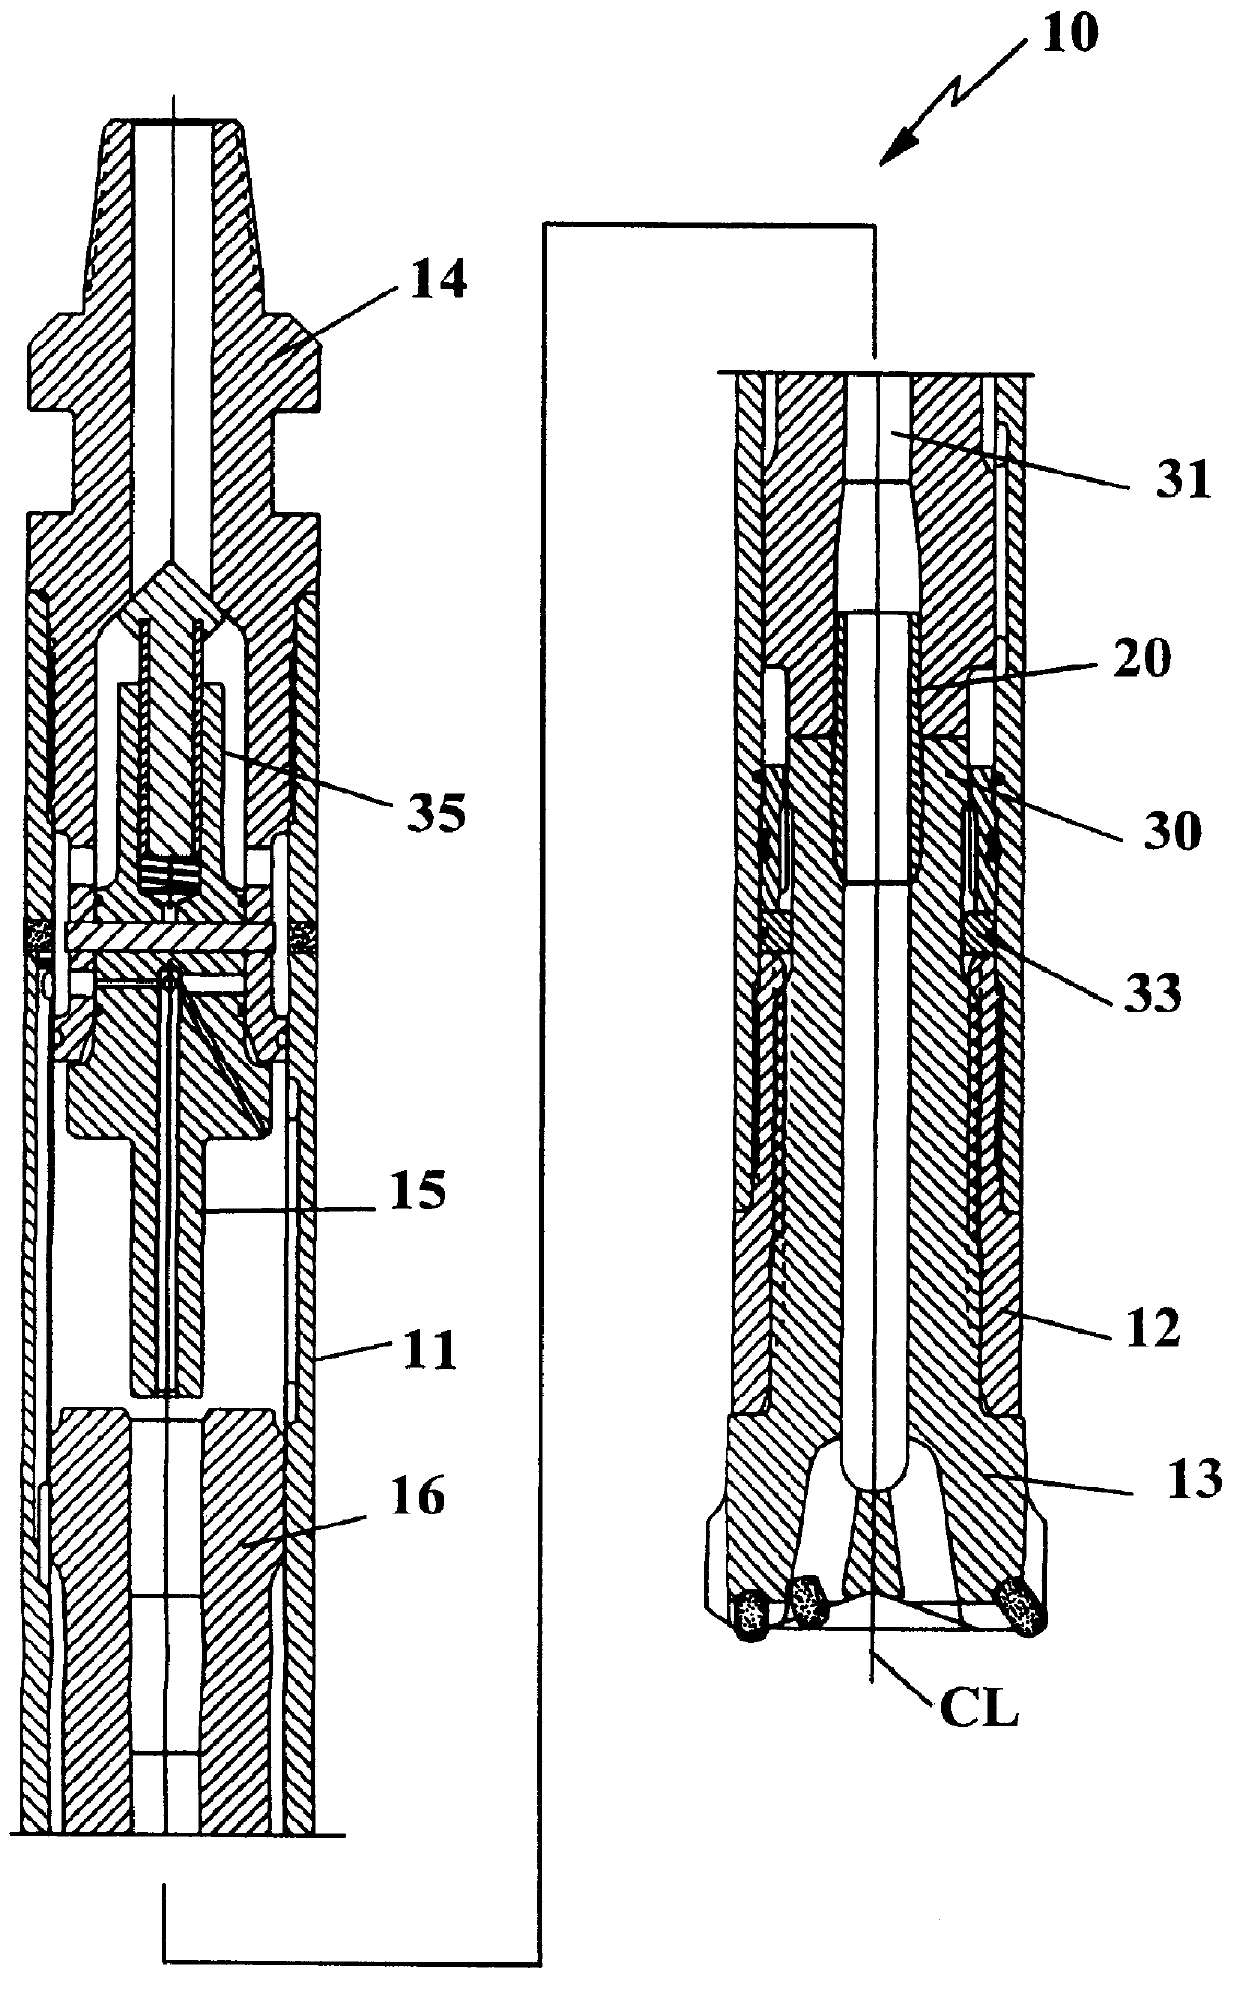 Percussive down-the-hole hammer and a drill bit therefor